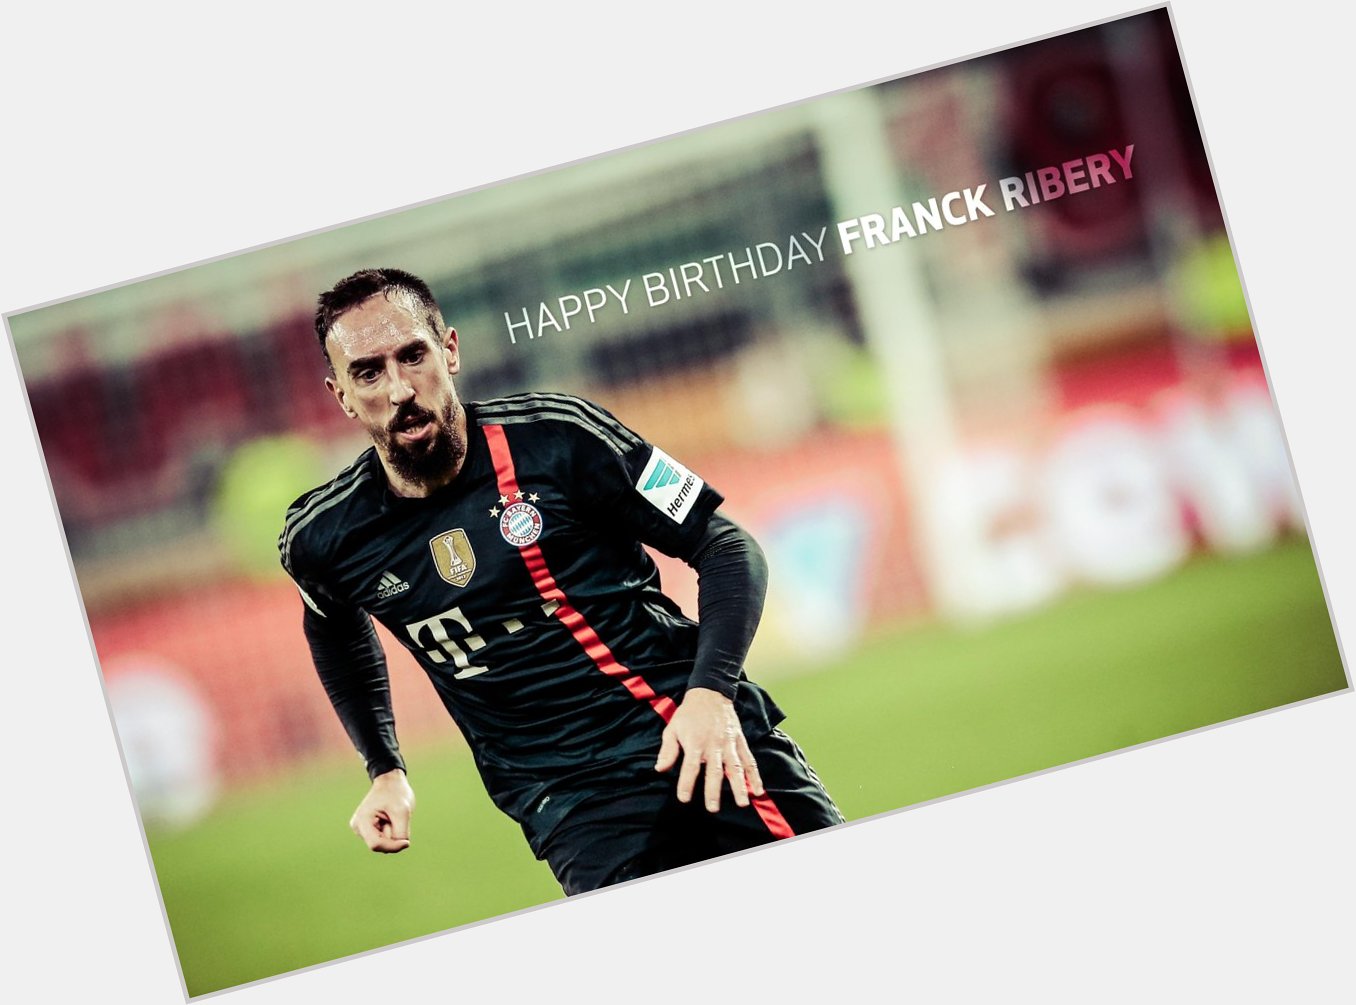 \" Happy 32nd birthday to Franck Ribery 

message us your favourite Ribery moment of magic 